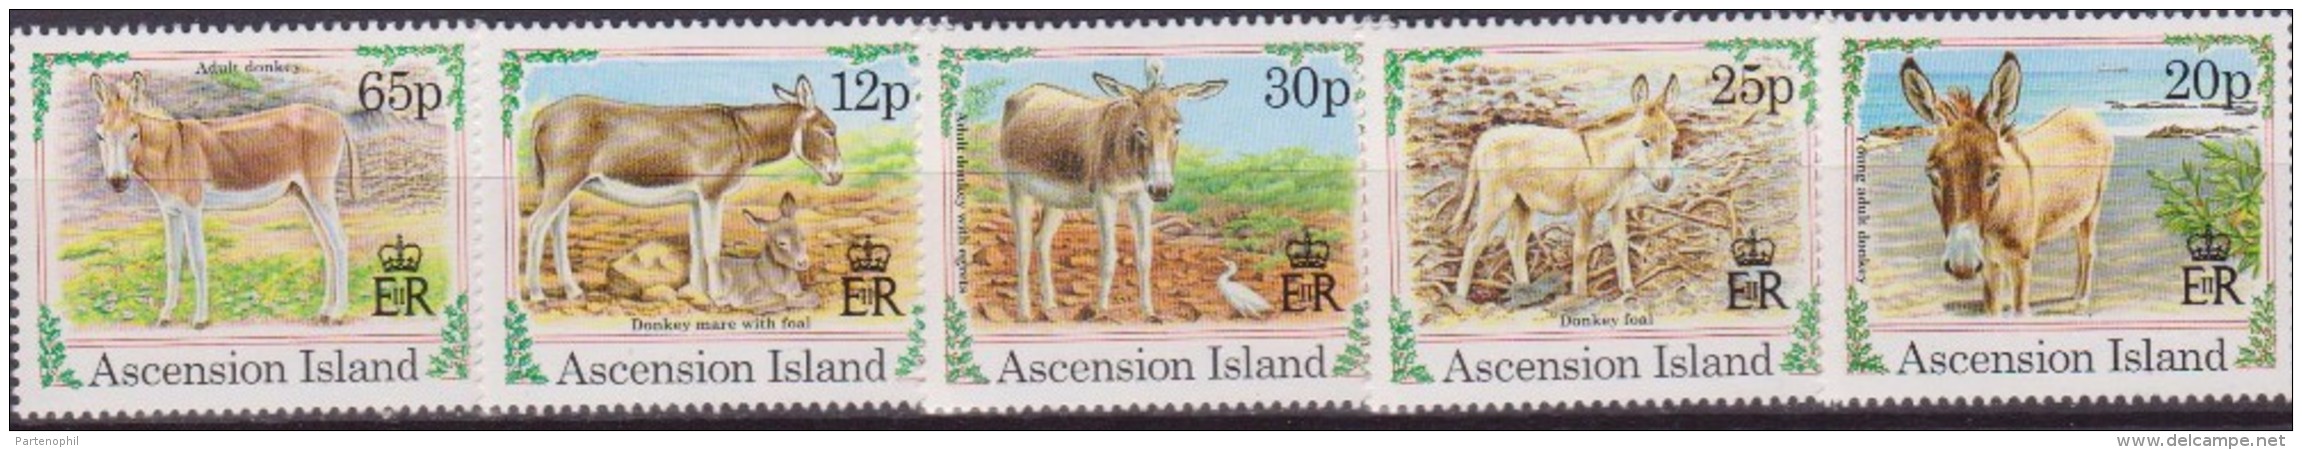 ASCENSION IS. DONKEY ASINI 618/22 MNH - Burros Y Asnos